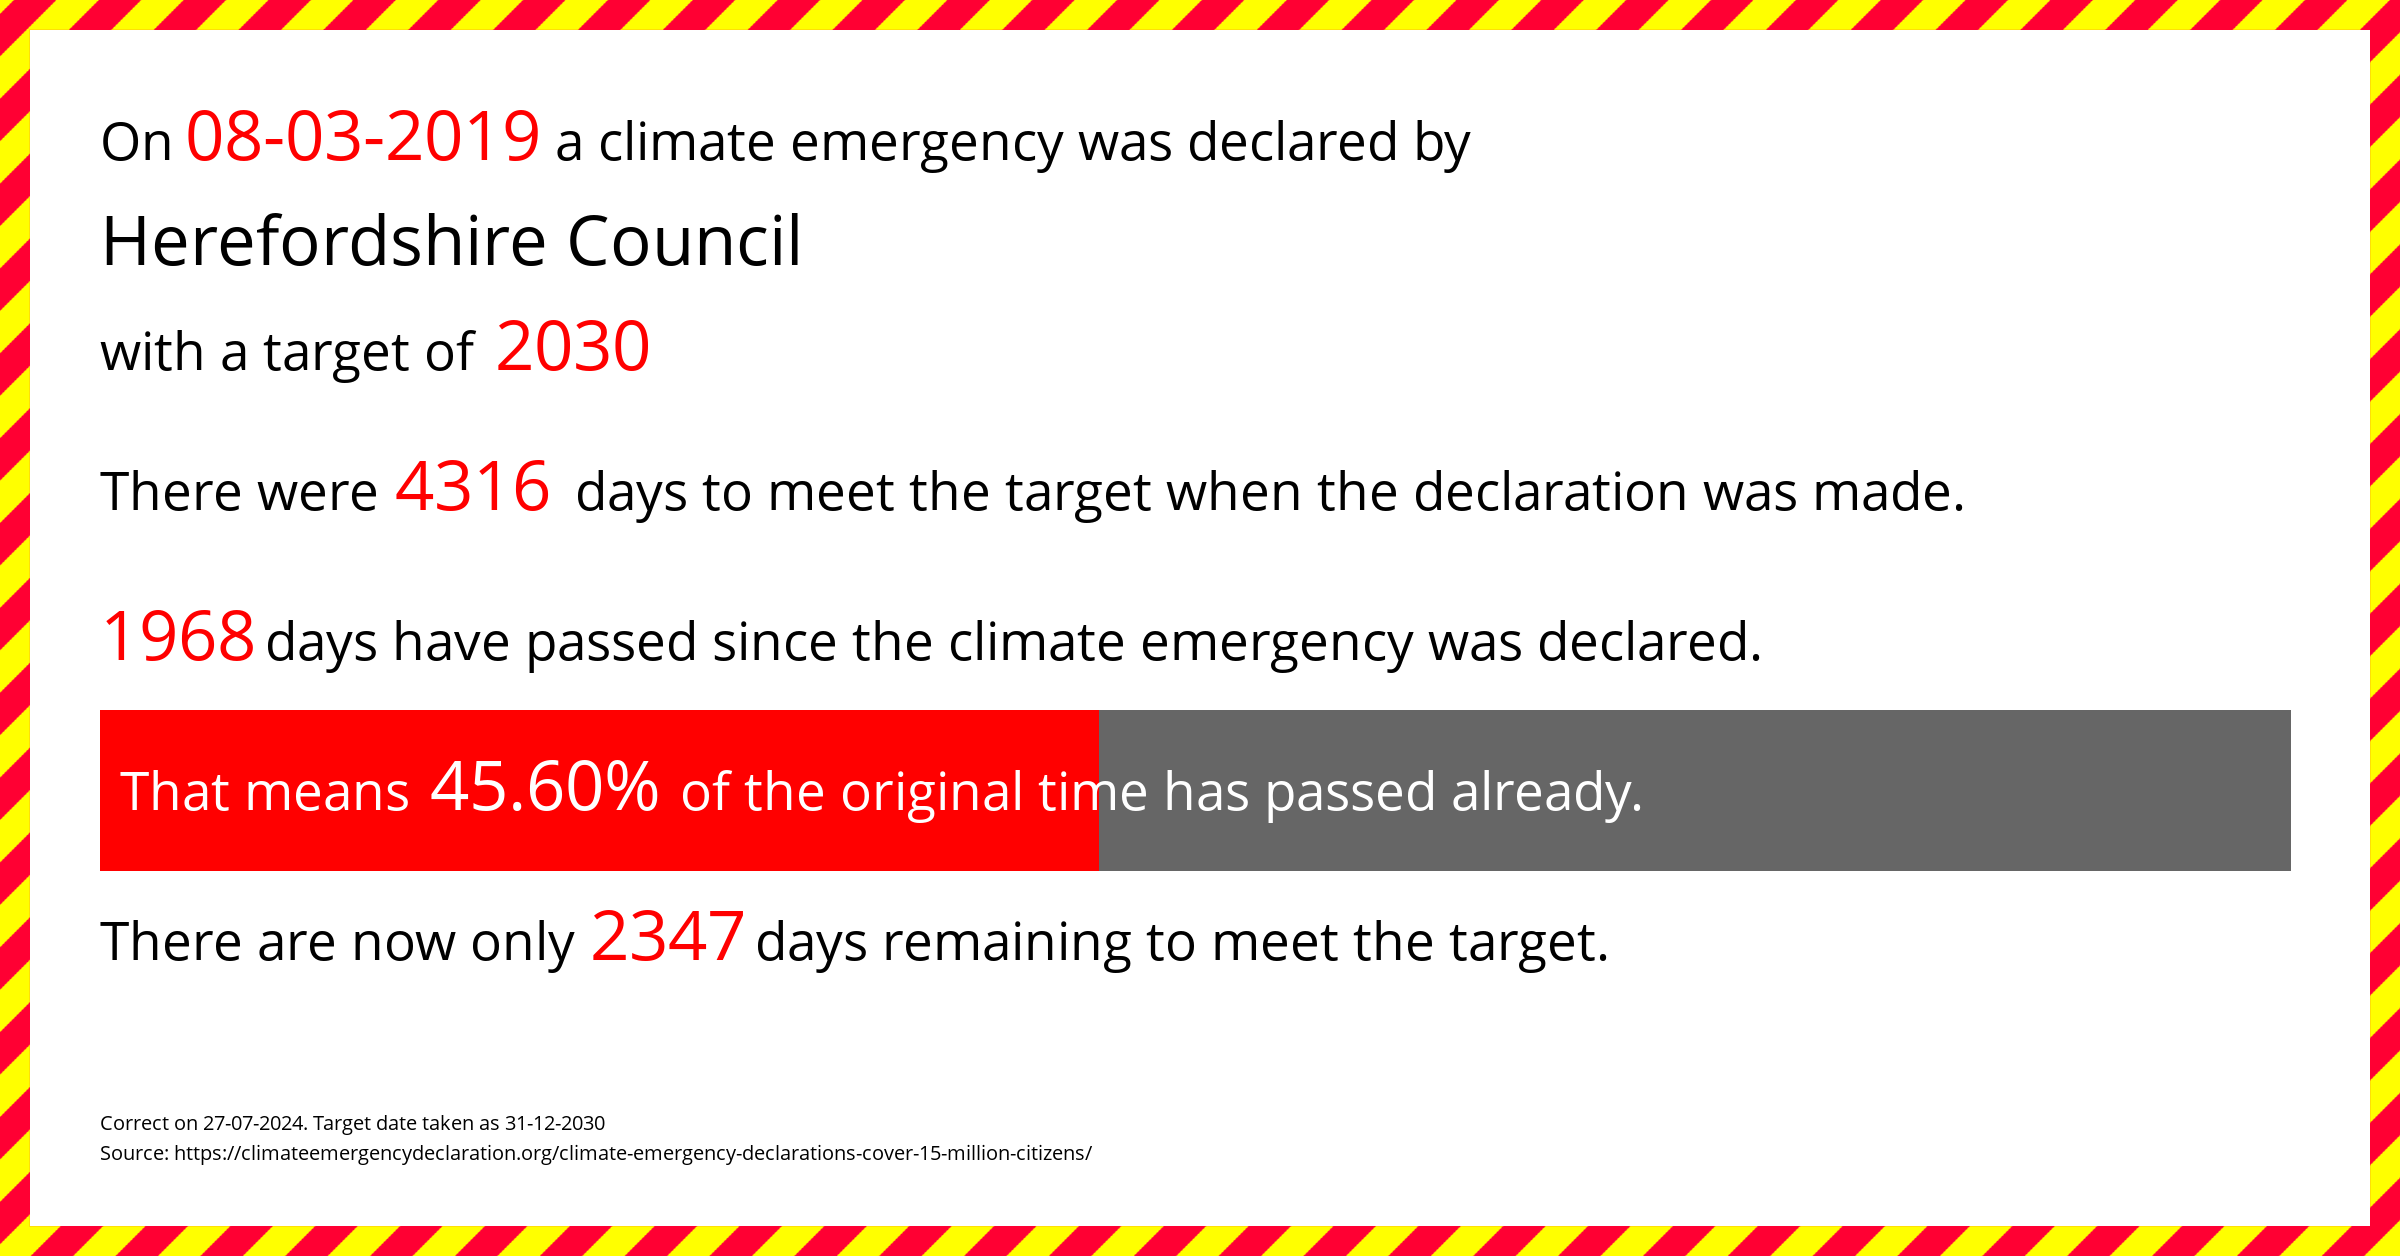 Herefordshire Council declared a Climate emergency on Friday 8th March 2019, with a target of 2030.